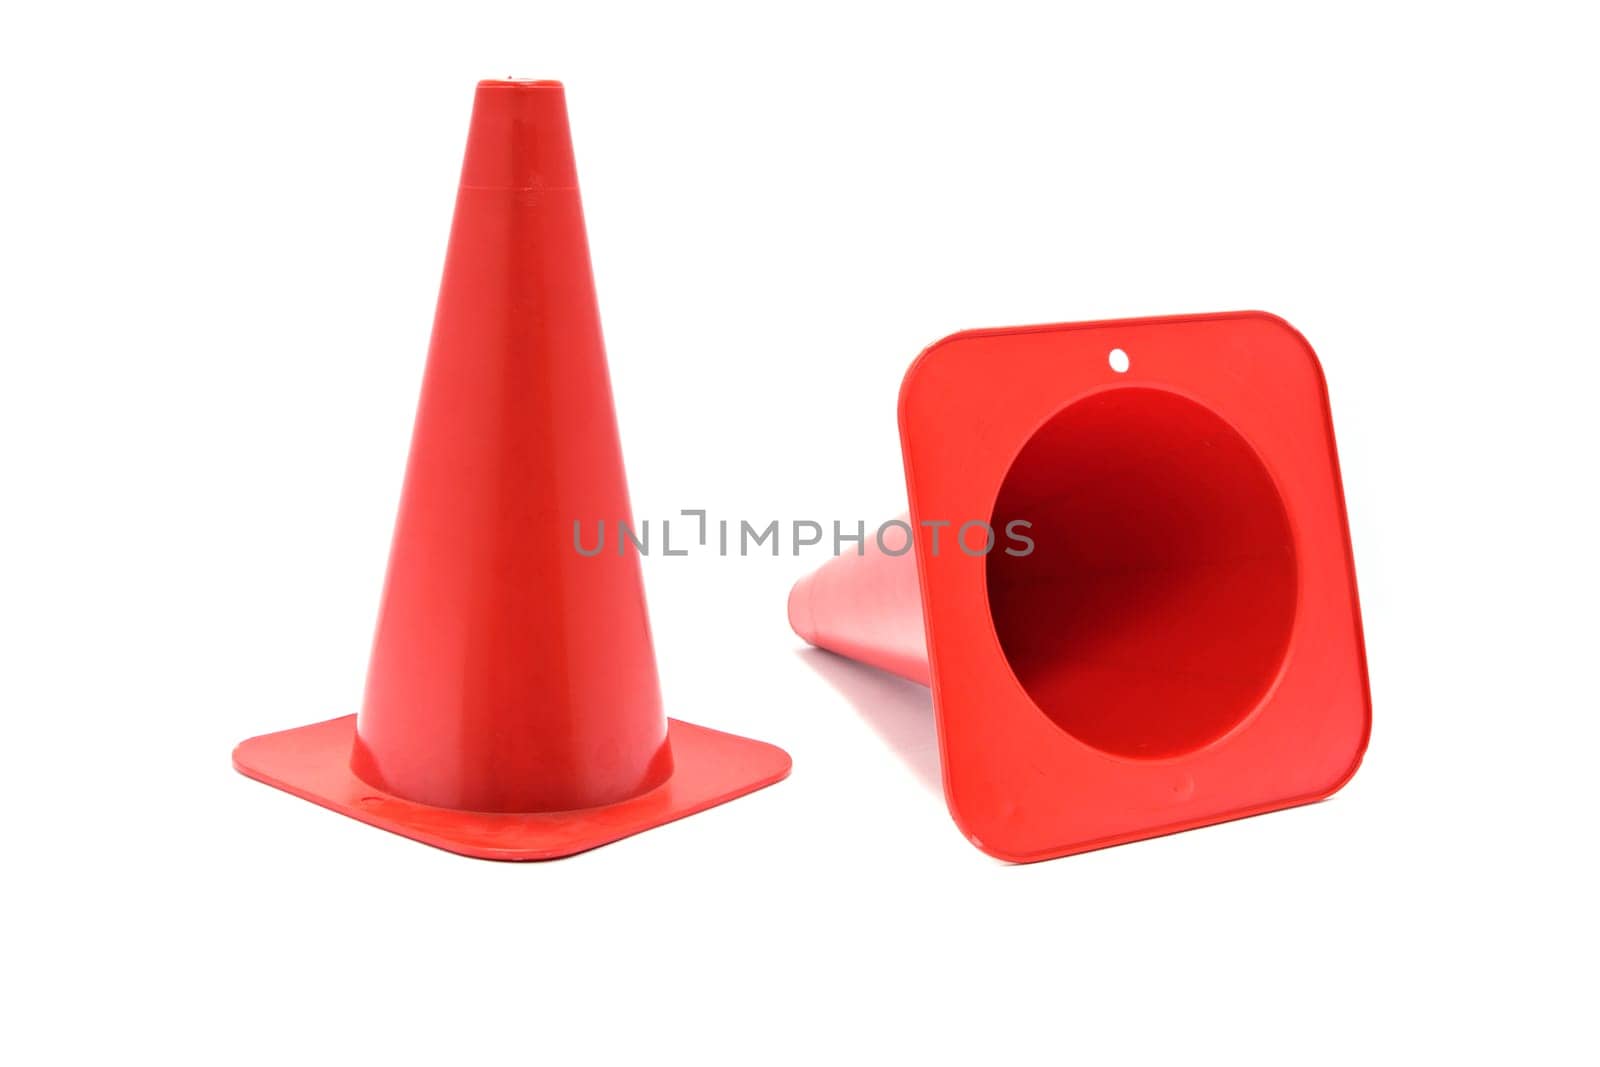 Red plastic cone with reflective stripes isolated on white background. Road cone signal